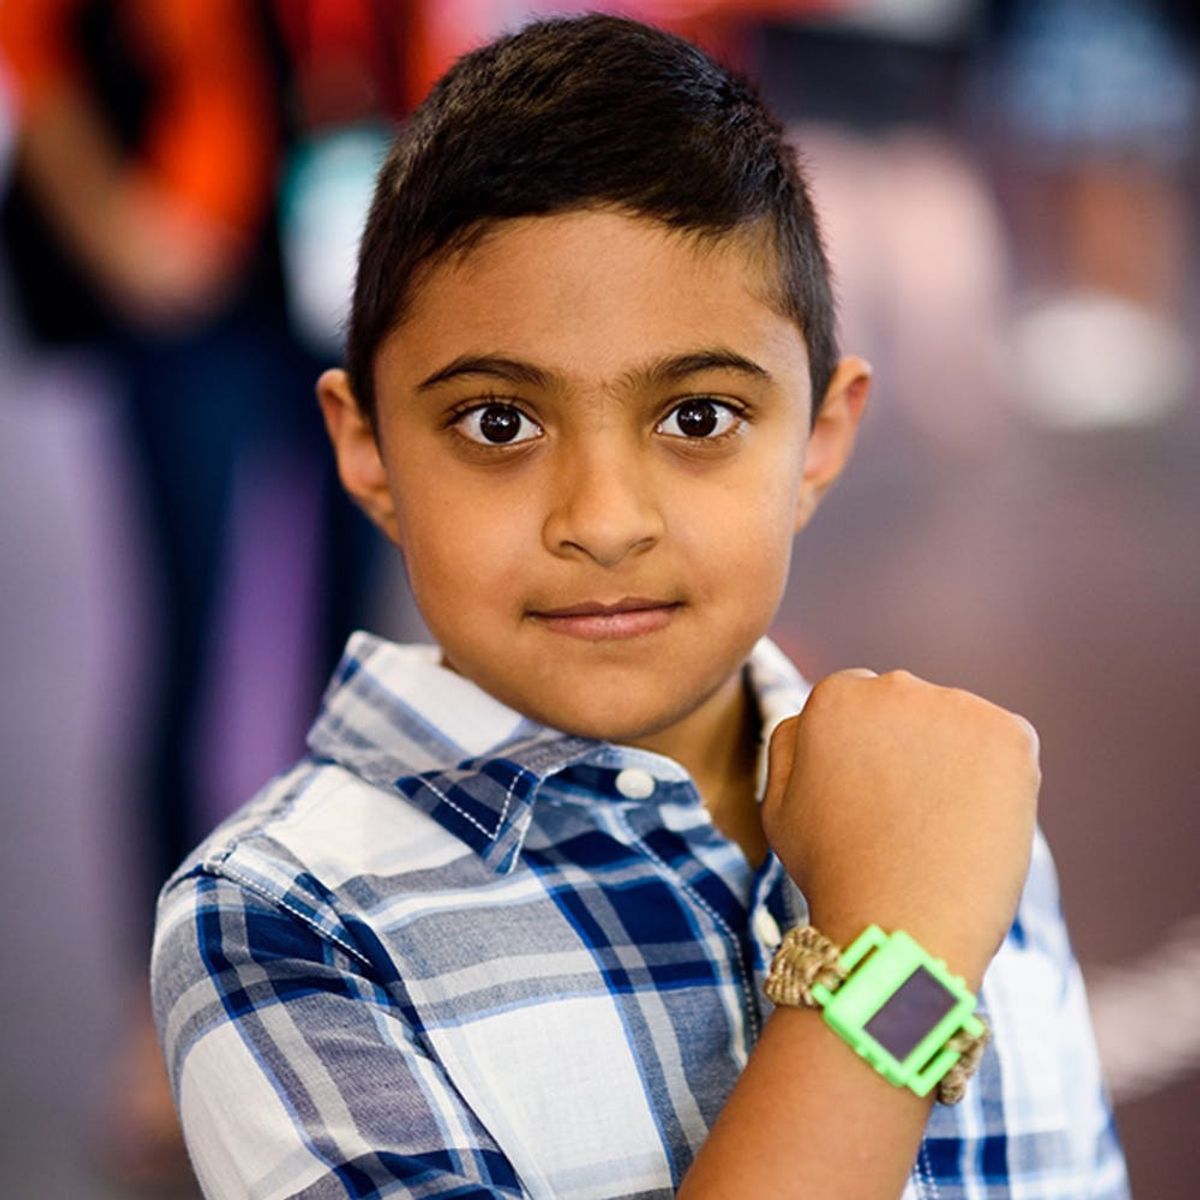 This 8-Year-Old Entrepreneur Will Inspire All Your Shark Tank Dreams